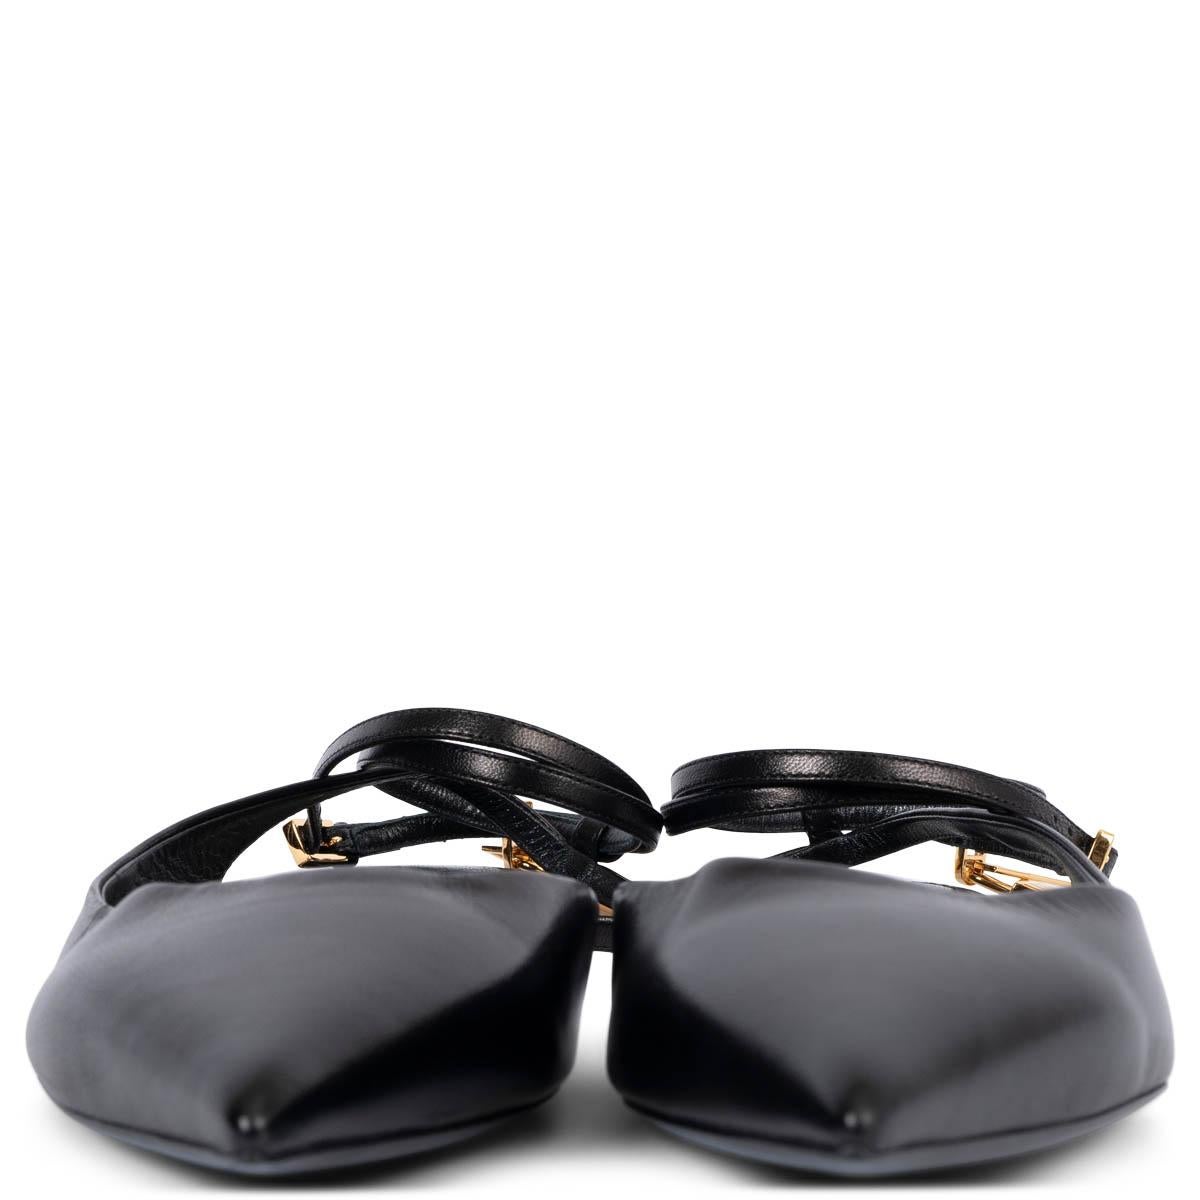 100% authentic Tom Ford Padlock 10MM pointed-toe ballet flats in smooth black leather featuring gold-tone hardware. Brand new. Come with dust bags. 

Measurements
Imprinted Size	40
Shoe Size	39.5
Inside Sole	26cm (10.1in)
Width	8cm (3.1in)
Heel	1cm